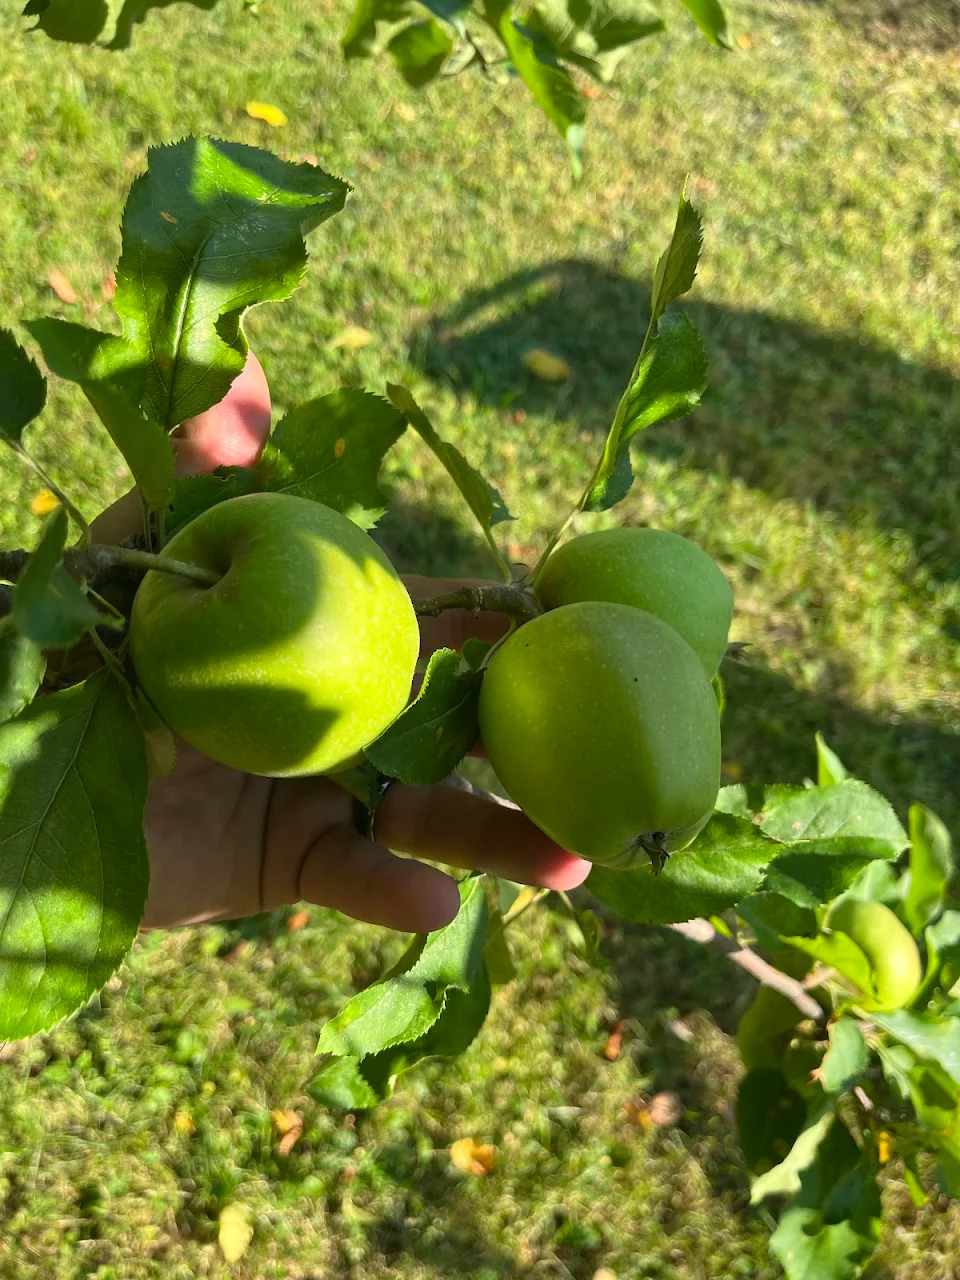 Apples growing on a tree my wife planted 30+ years ago